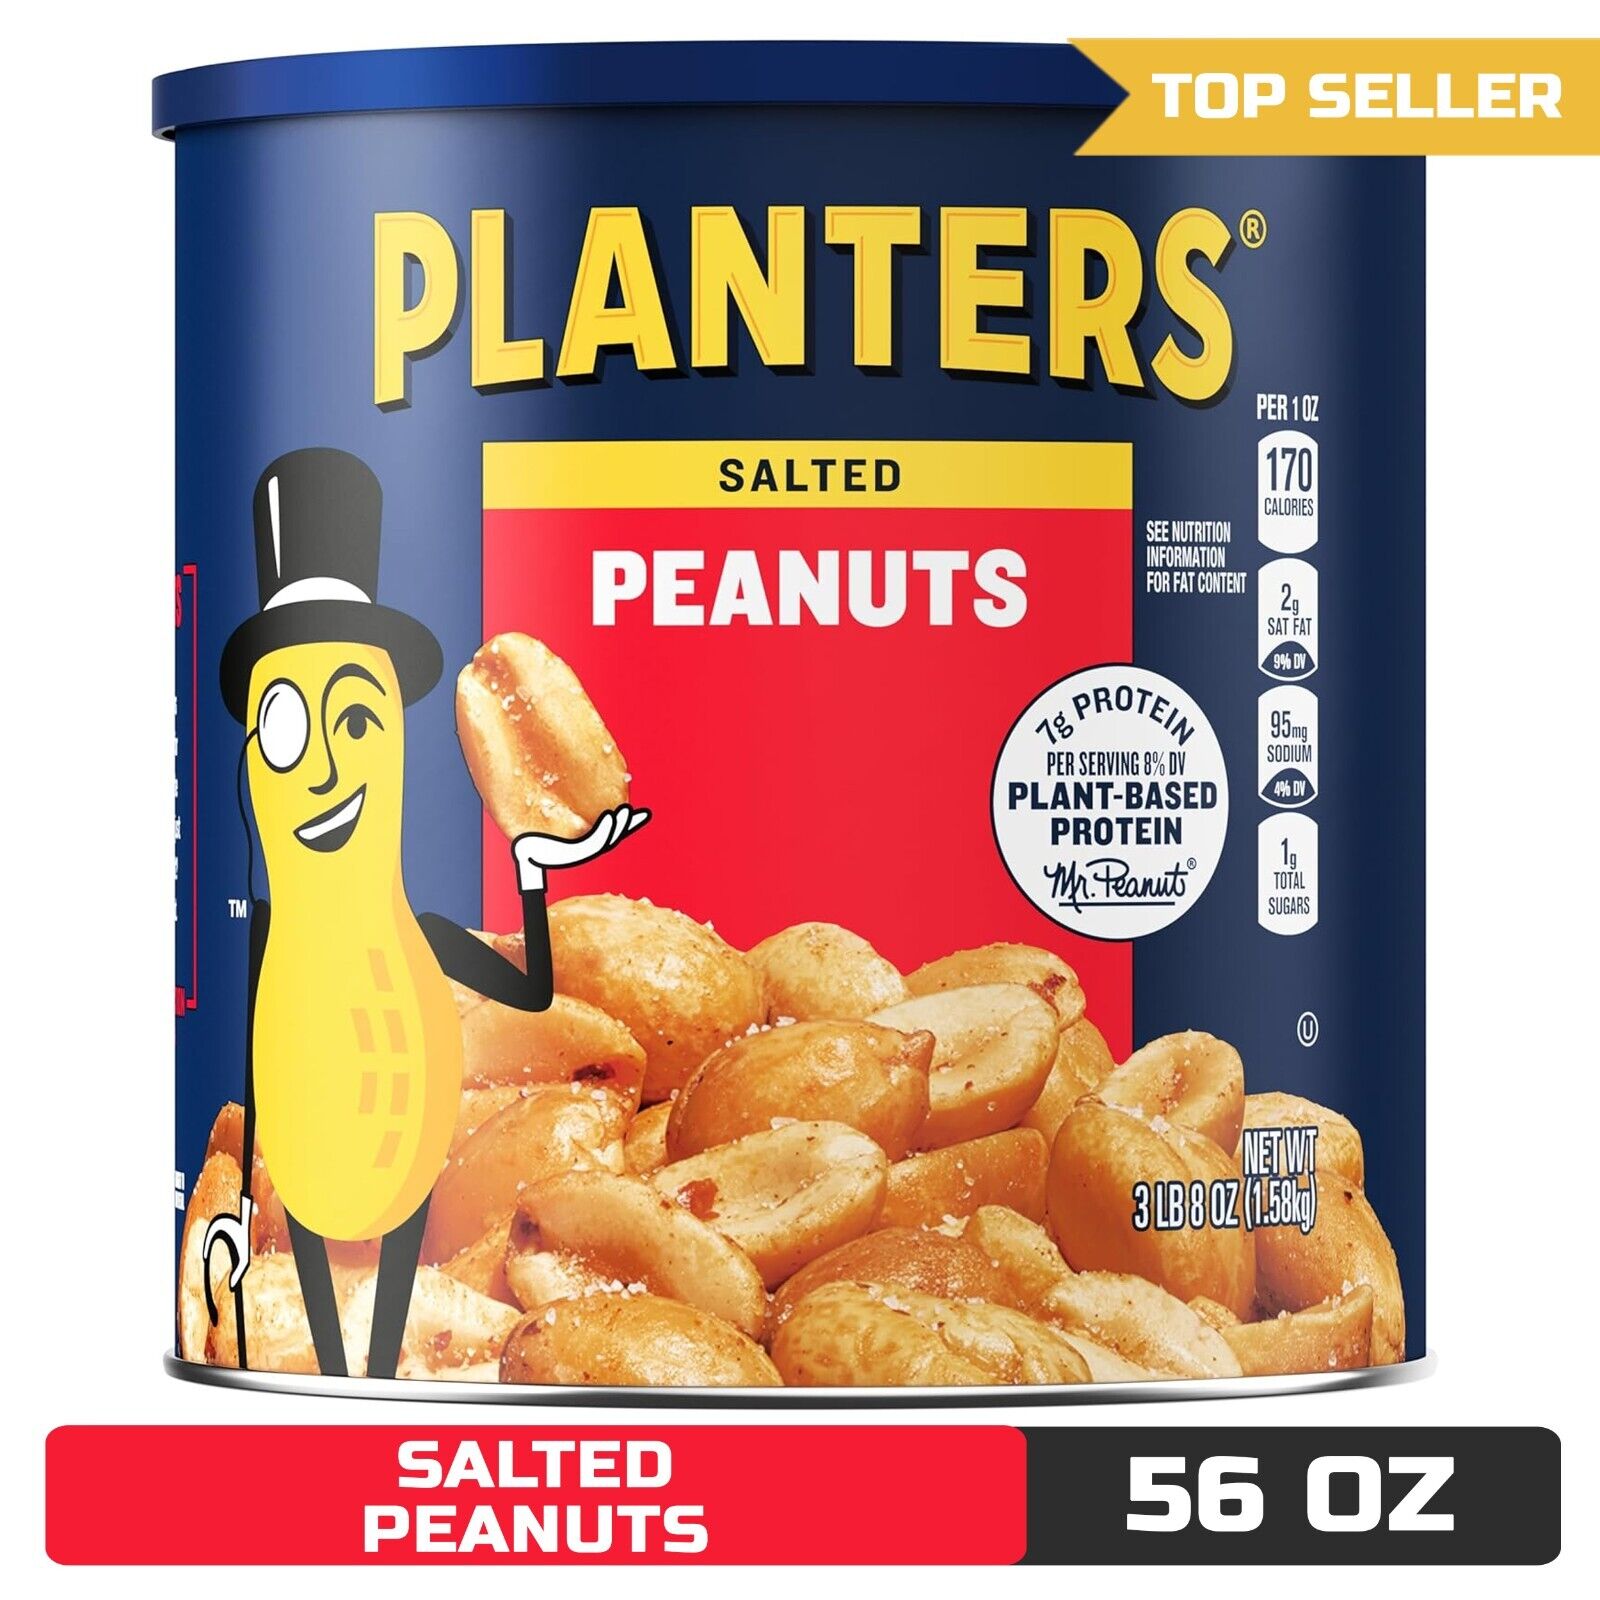 PLANTERS Salted Peanuts - Classic Crunch, 56 oz Canister